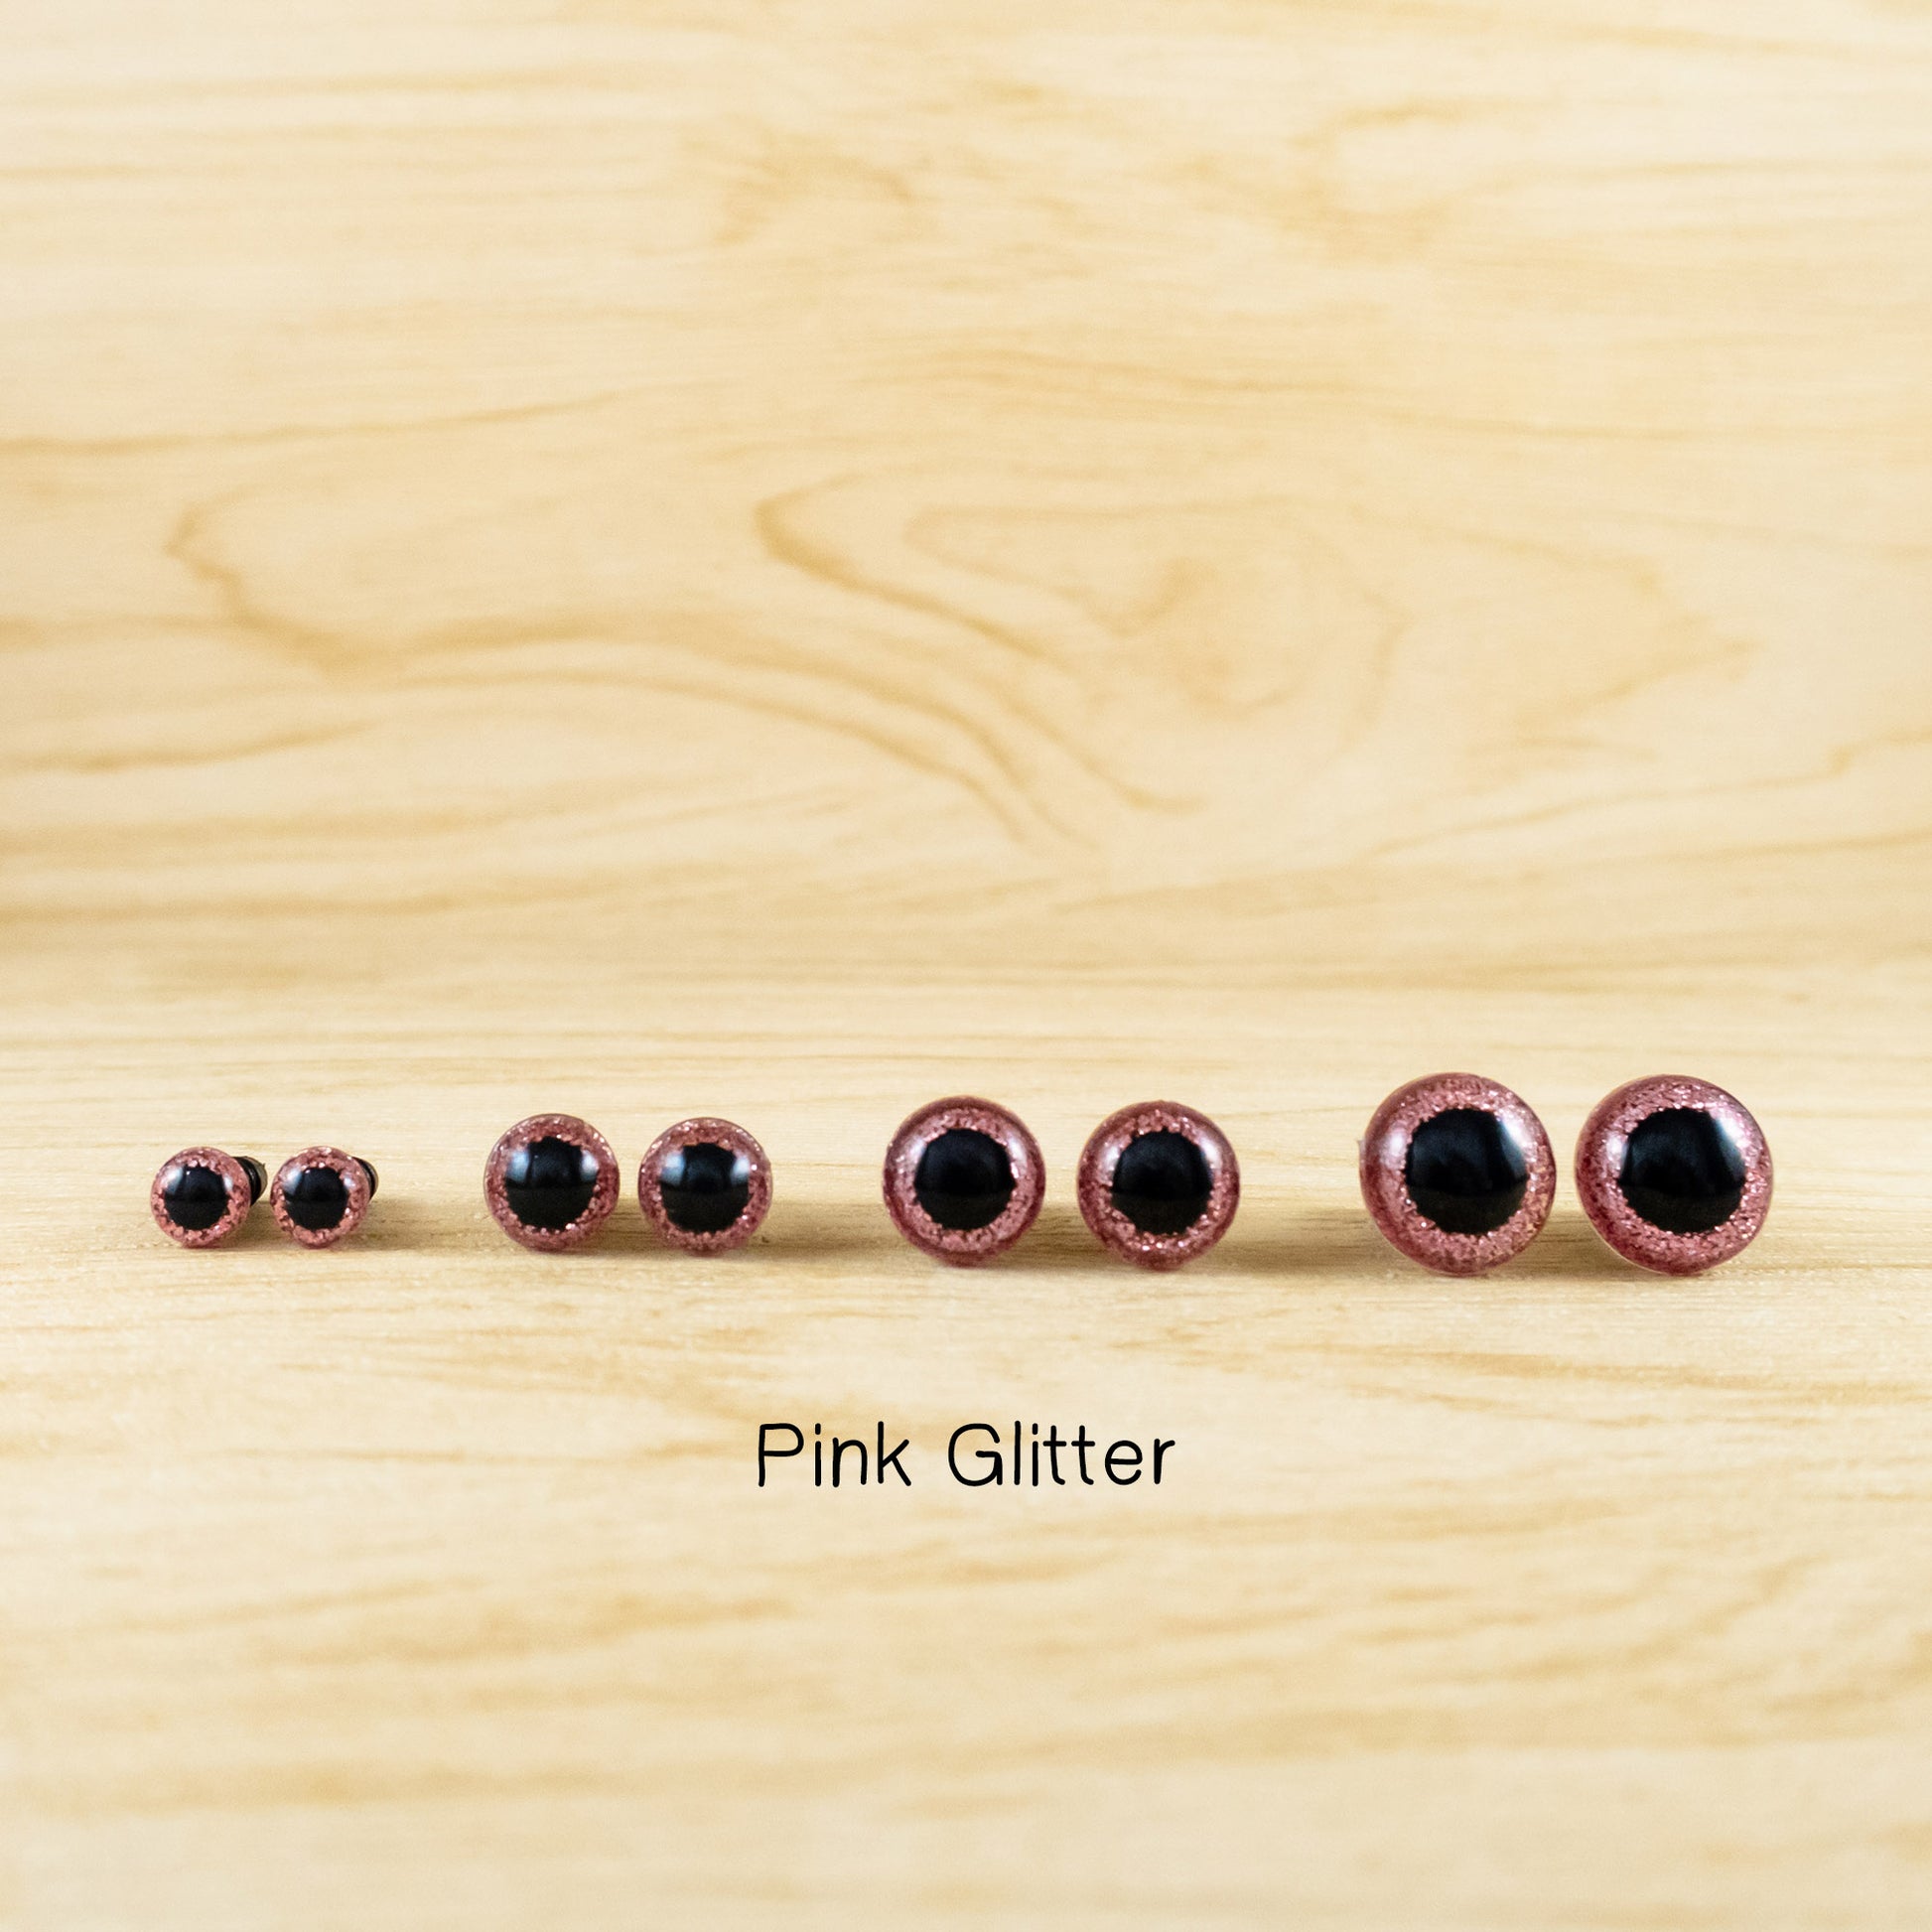 Glitter Safety Eyes Sample Pack - Single Color in 4 Sizes, 3 pairs